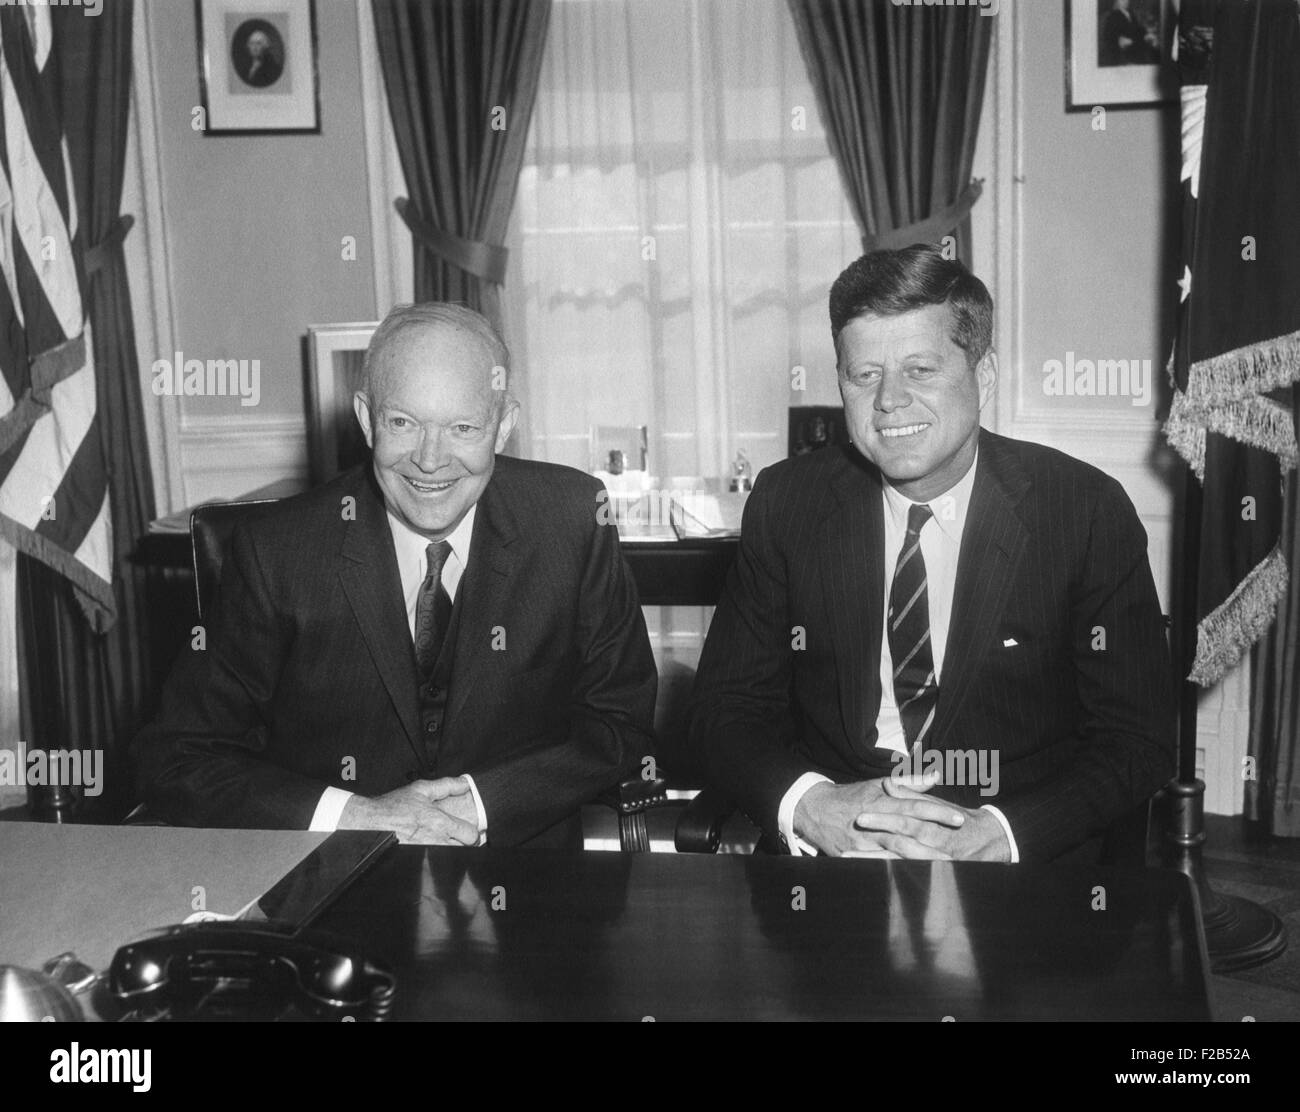 President Dwight Eisenhower Meets with President-elect John Kennedy. They discussed the transition from the Eisenhower to Kennedy presidency. Dec. 12, 1960. - (BSLOC 2015 1 132) Stock Photo